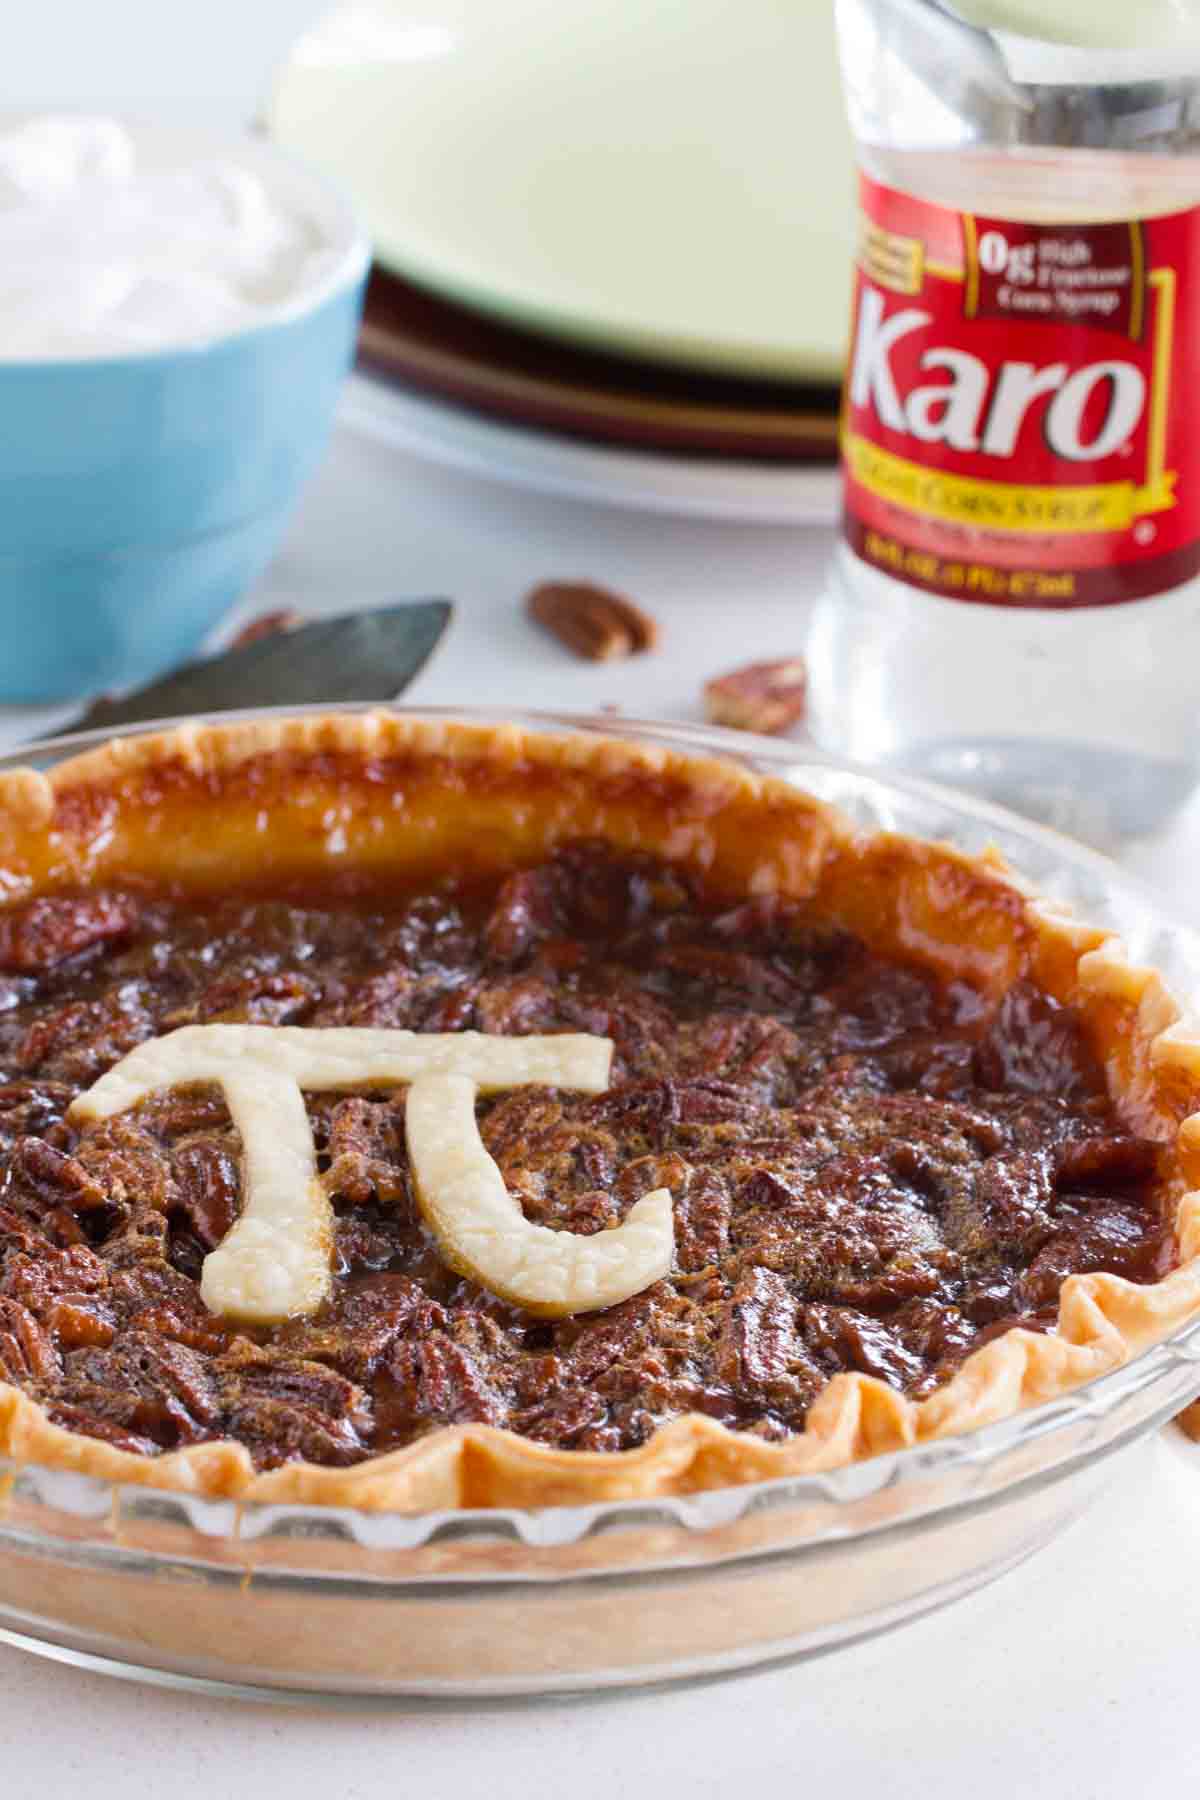 Whole Classic Pecan Pie with a Pi sign in pie dough.